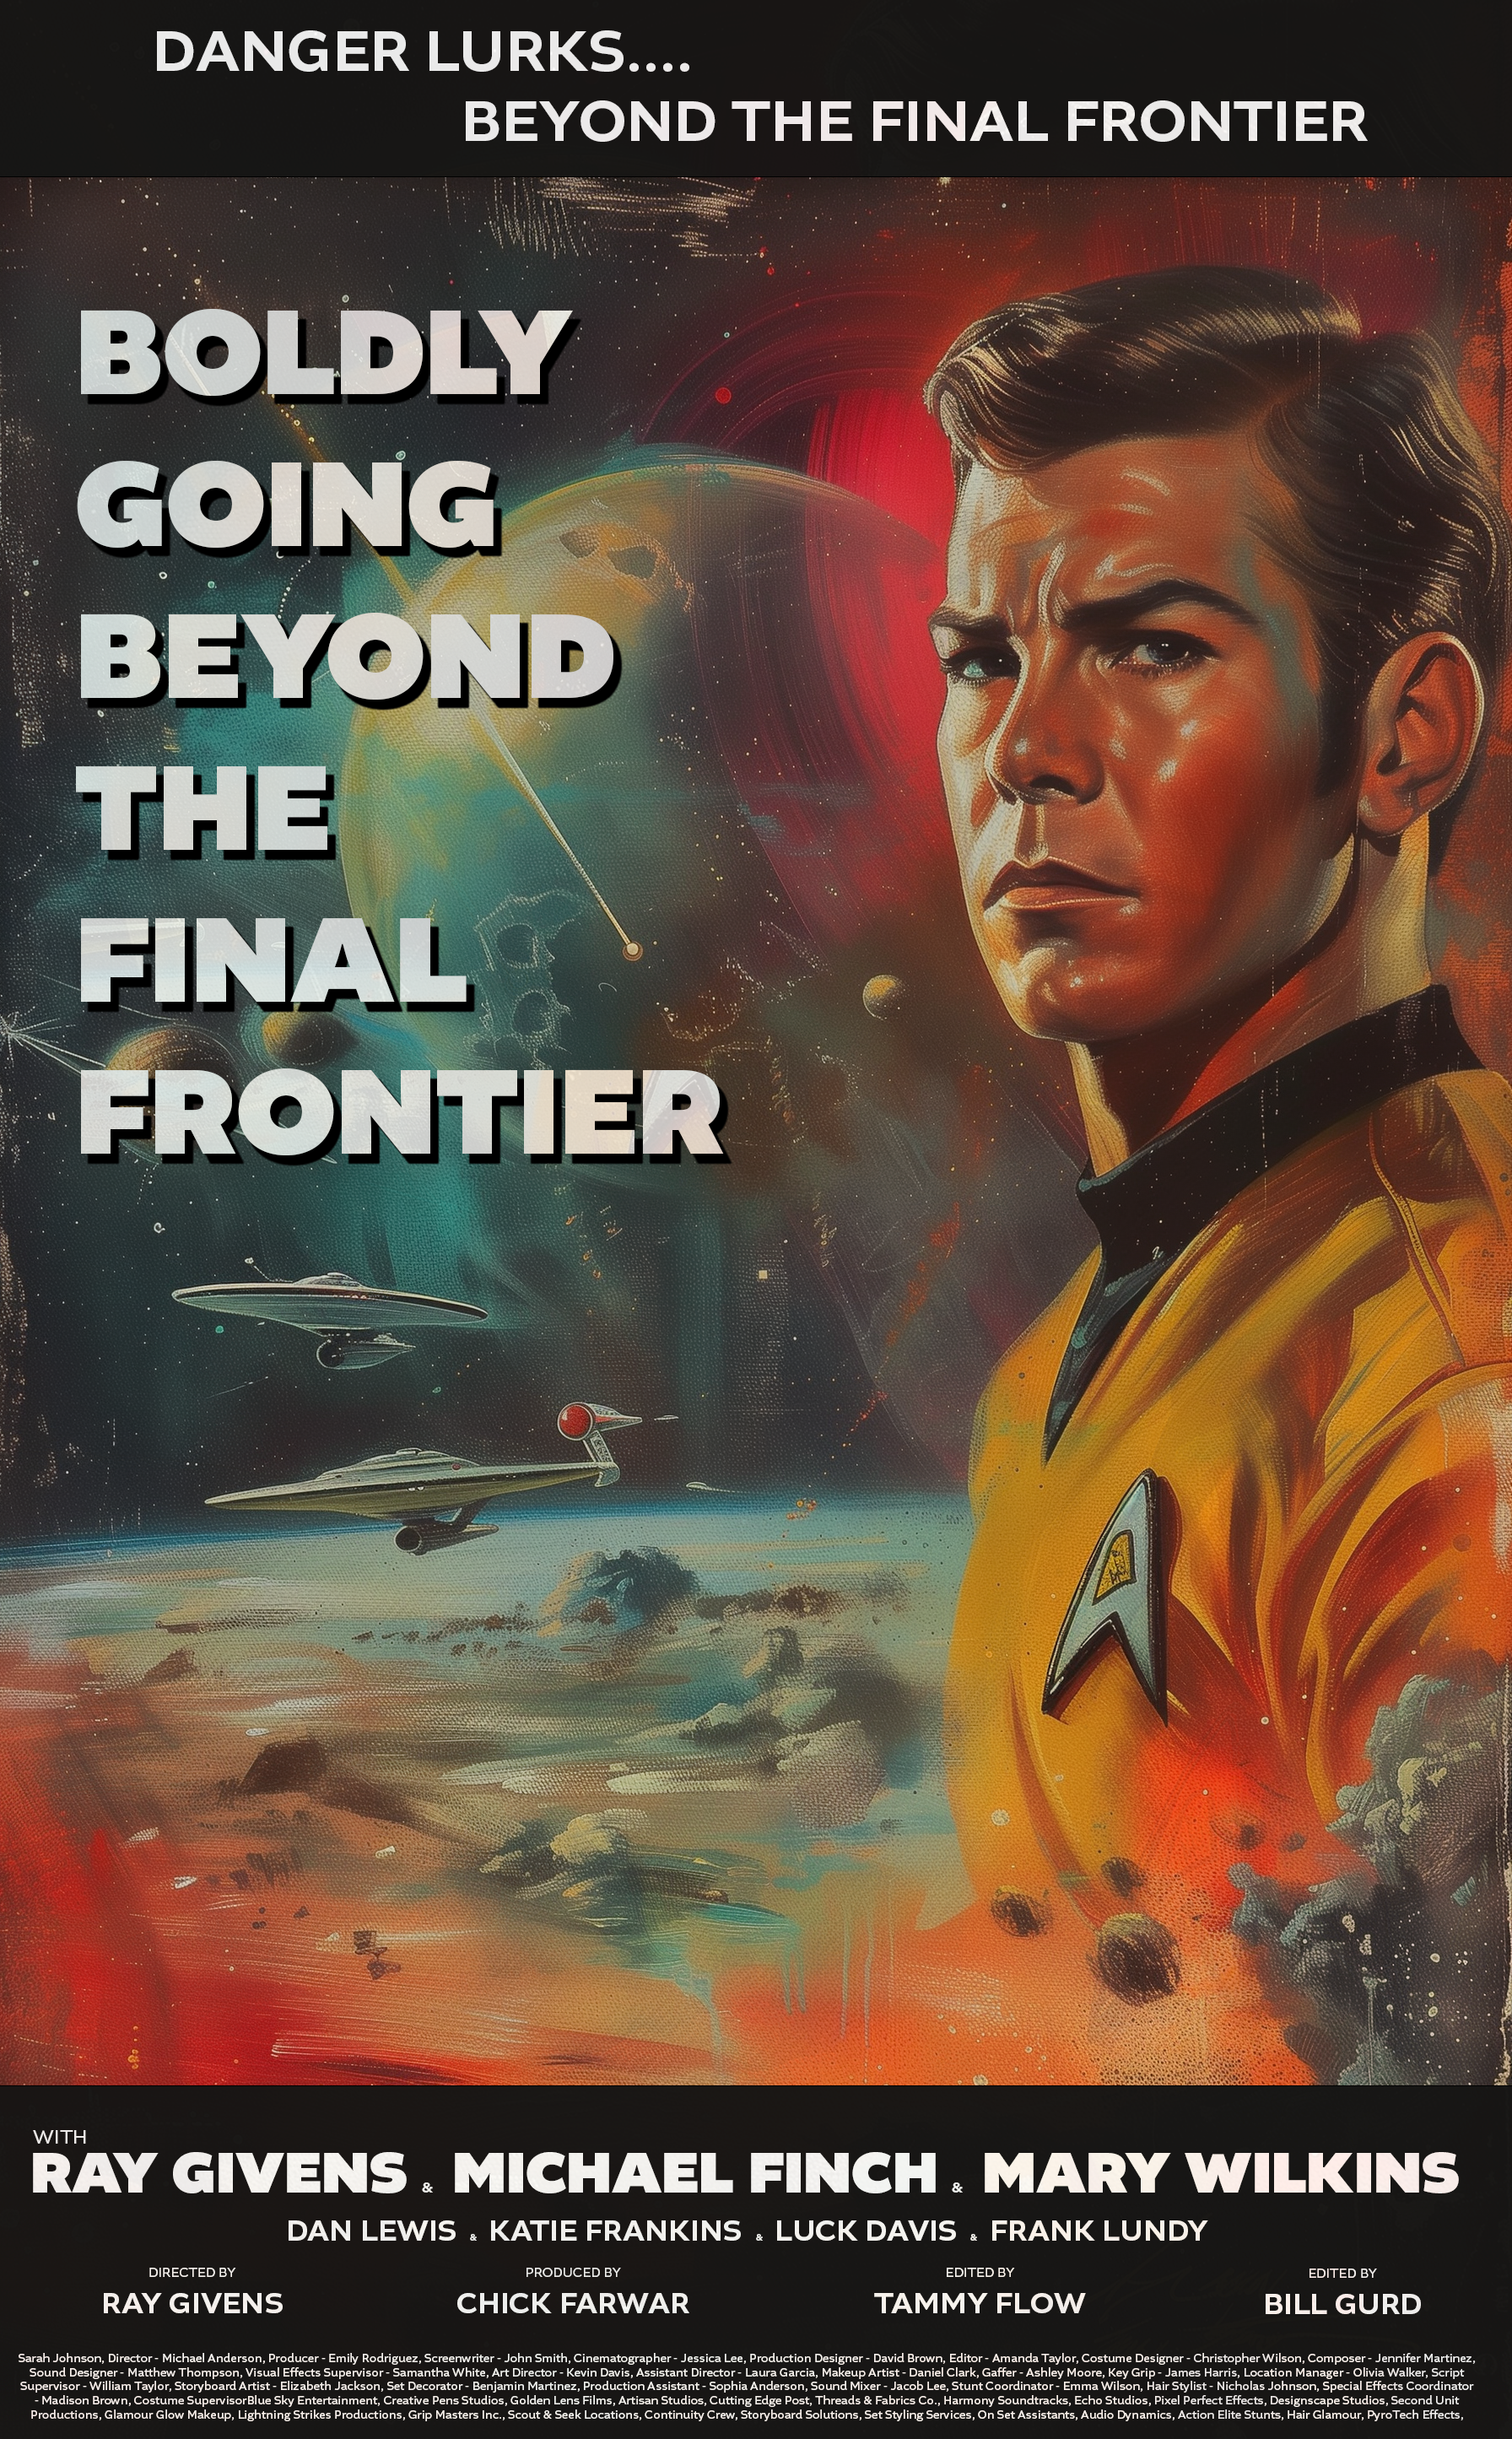 Name:  Beyond the Final Frontier.png
Views: 140
Size:  8.19 MB